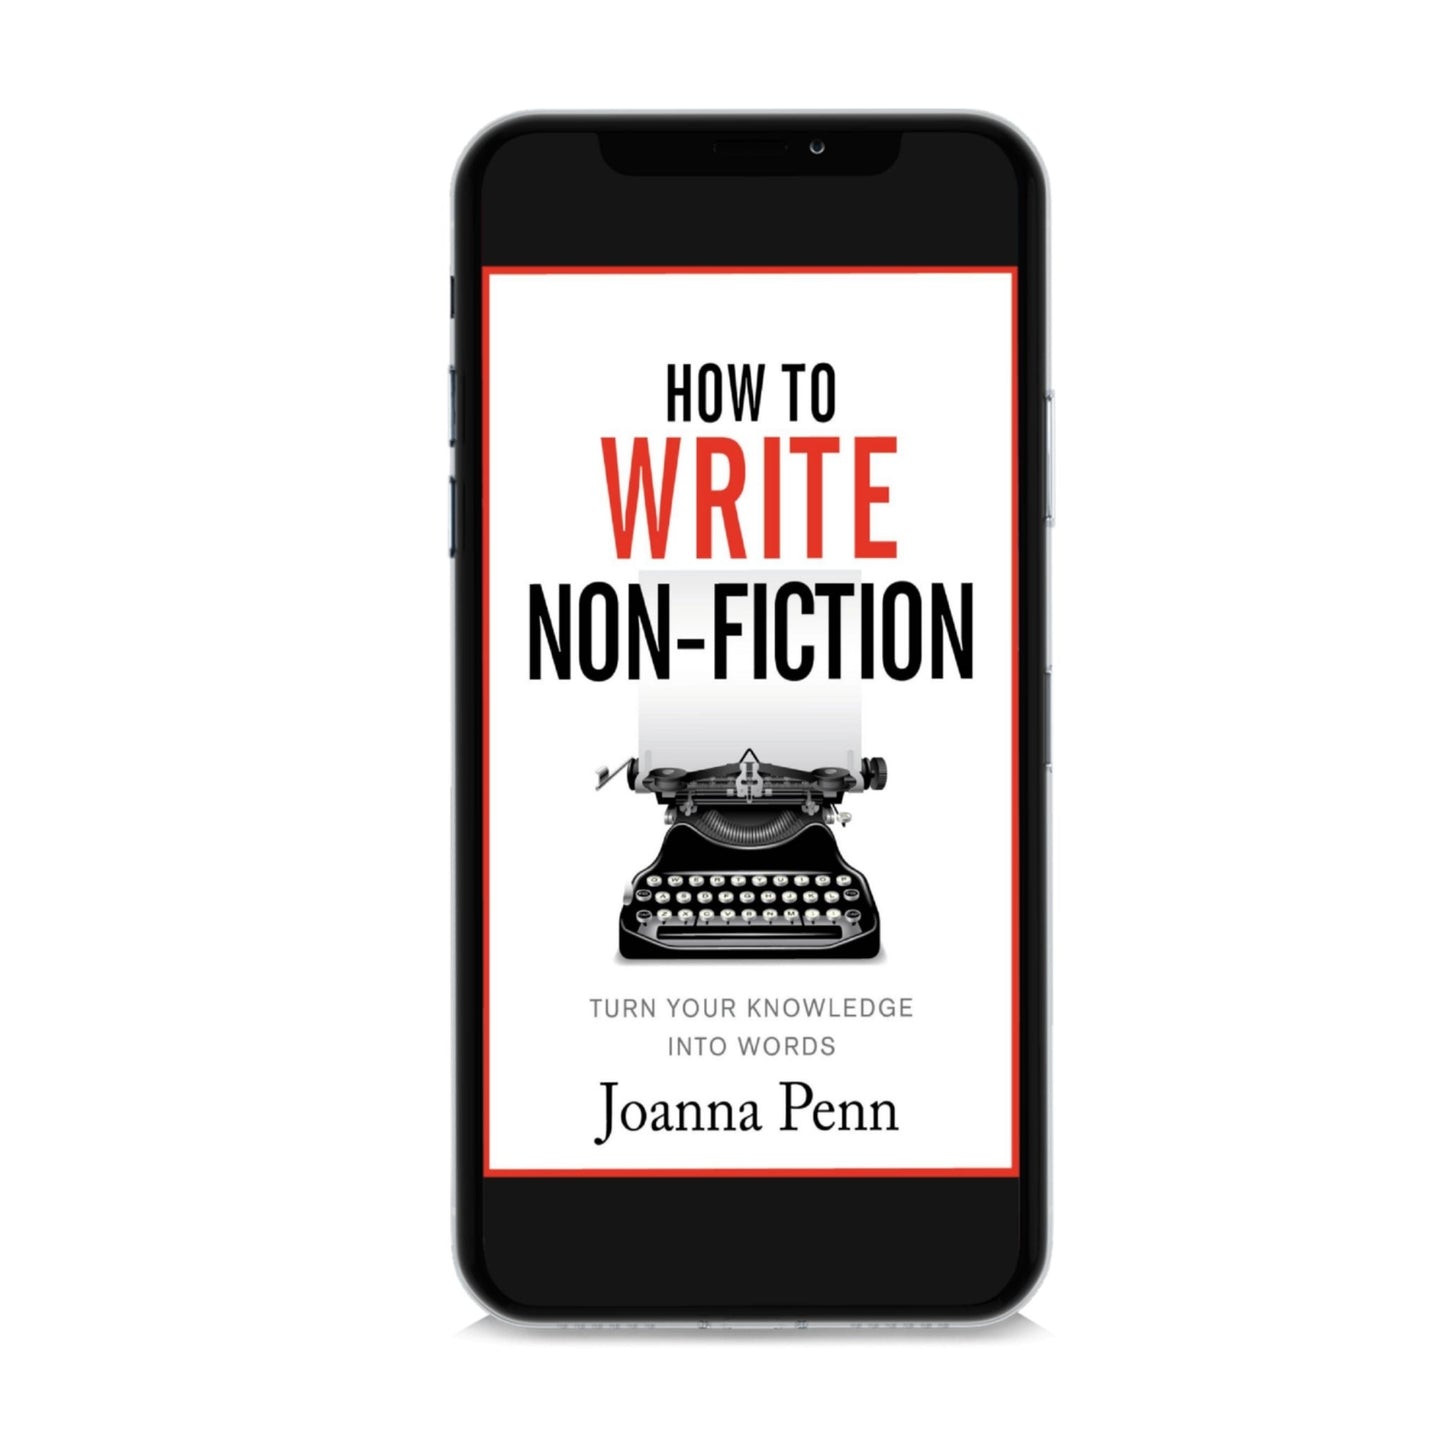 How To Write Non-Fiction Ebook